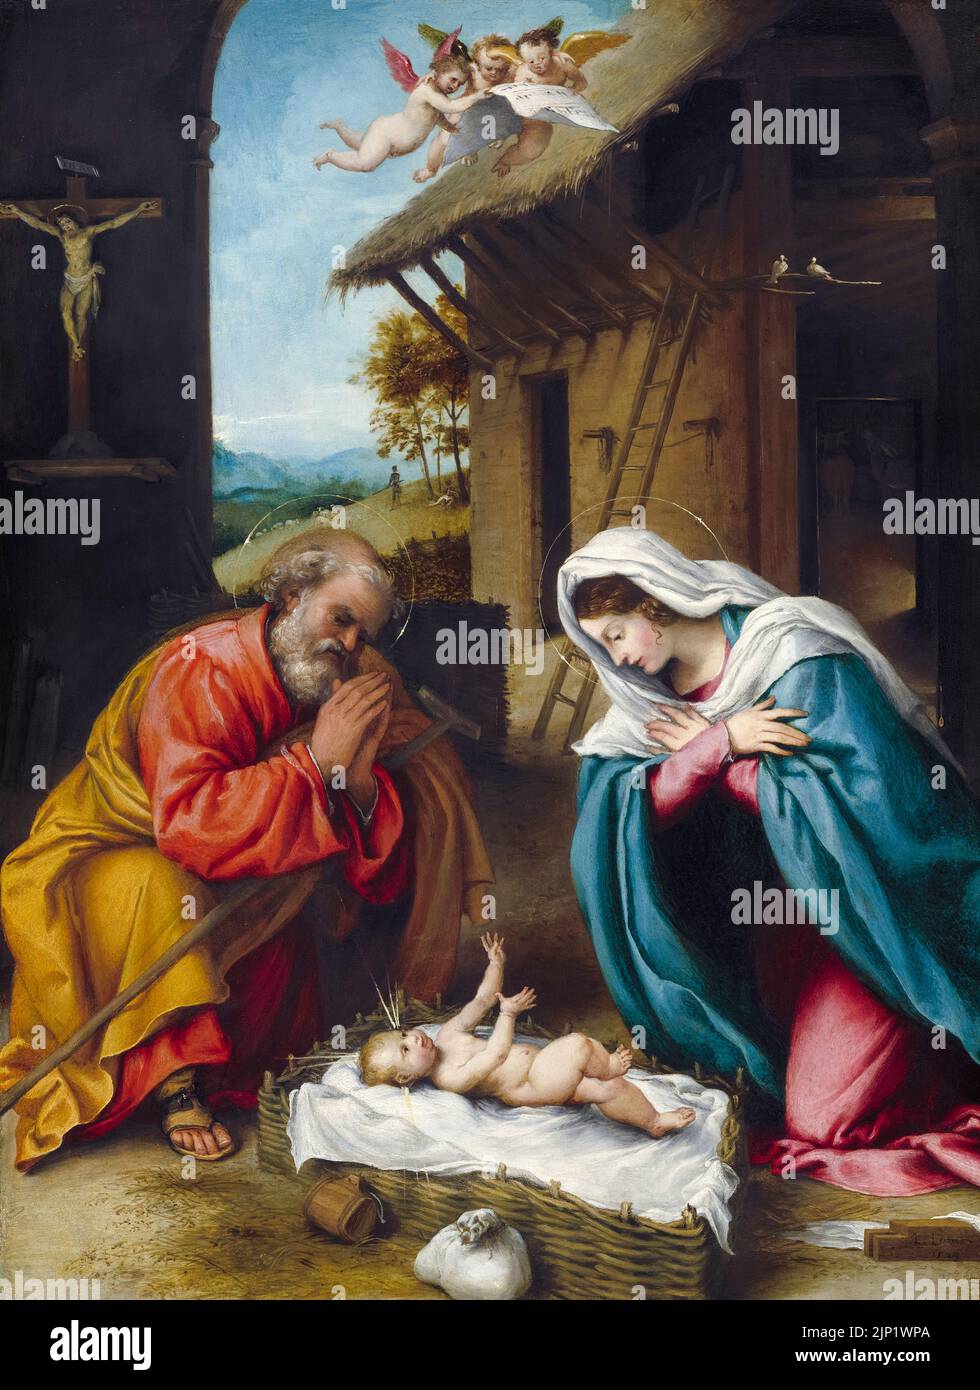 The Nativity, painting in oil on panel by Lorenzo Lotto, 1523 Stock Photo